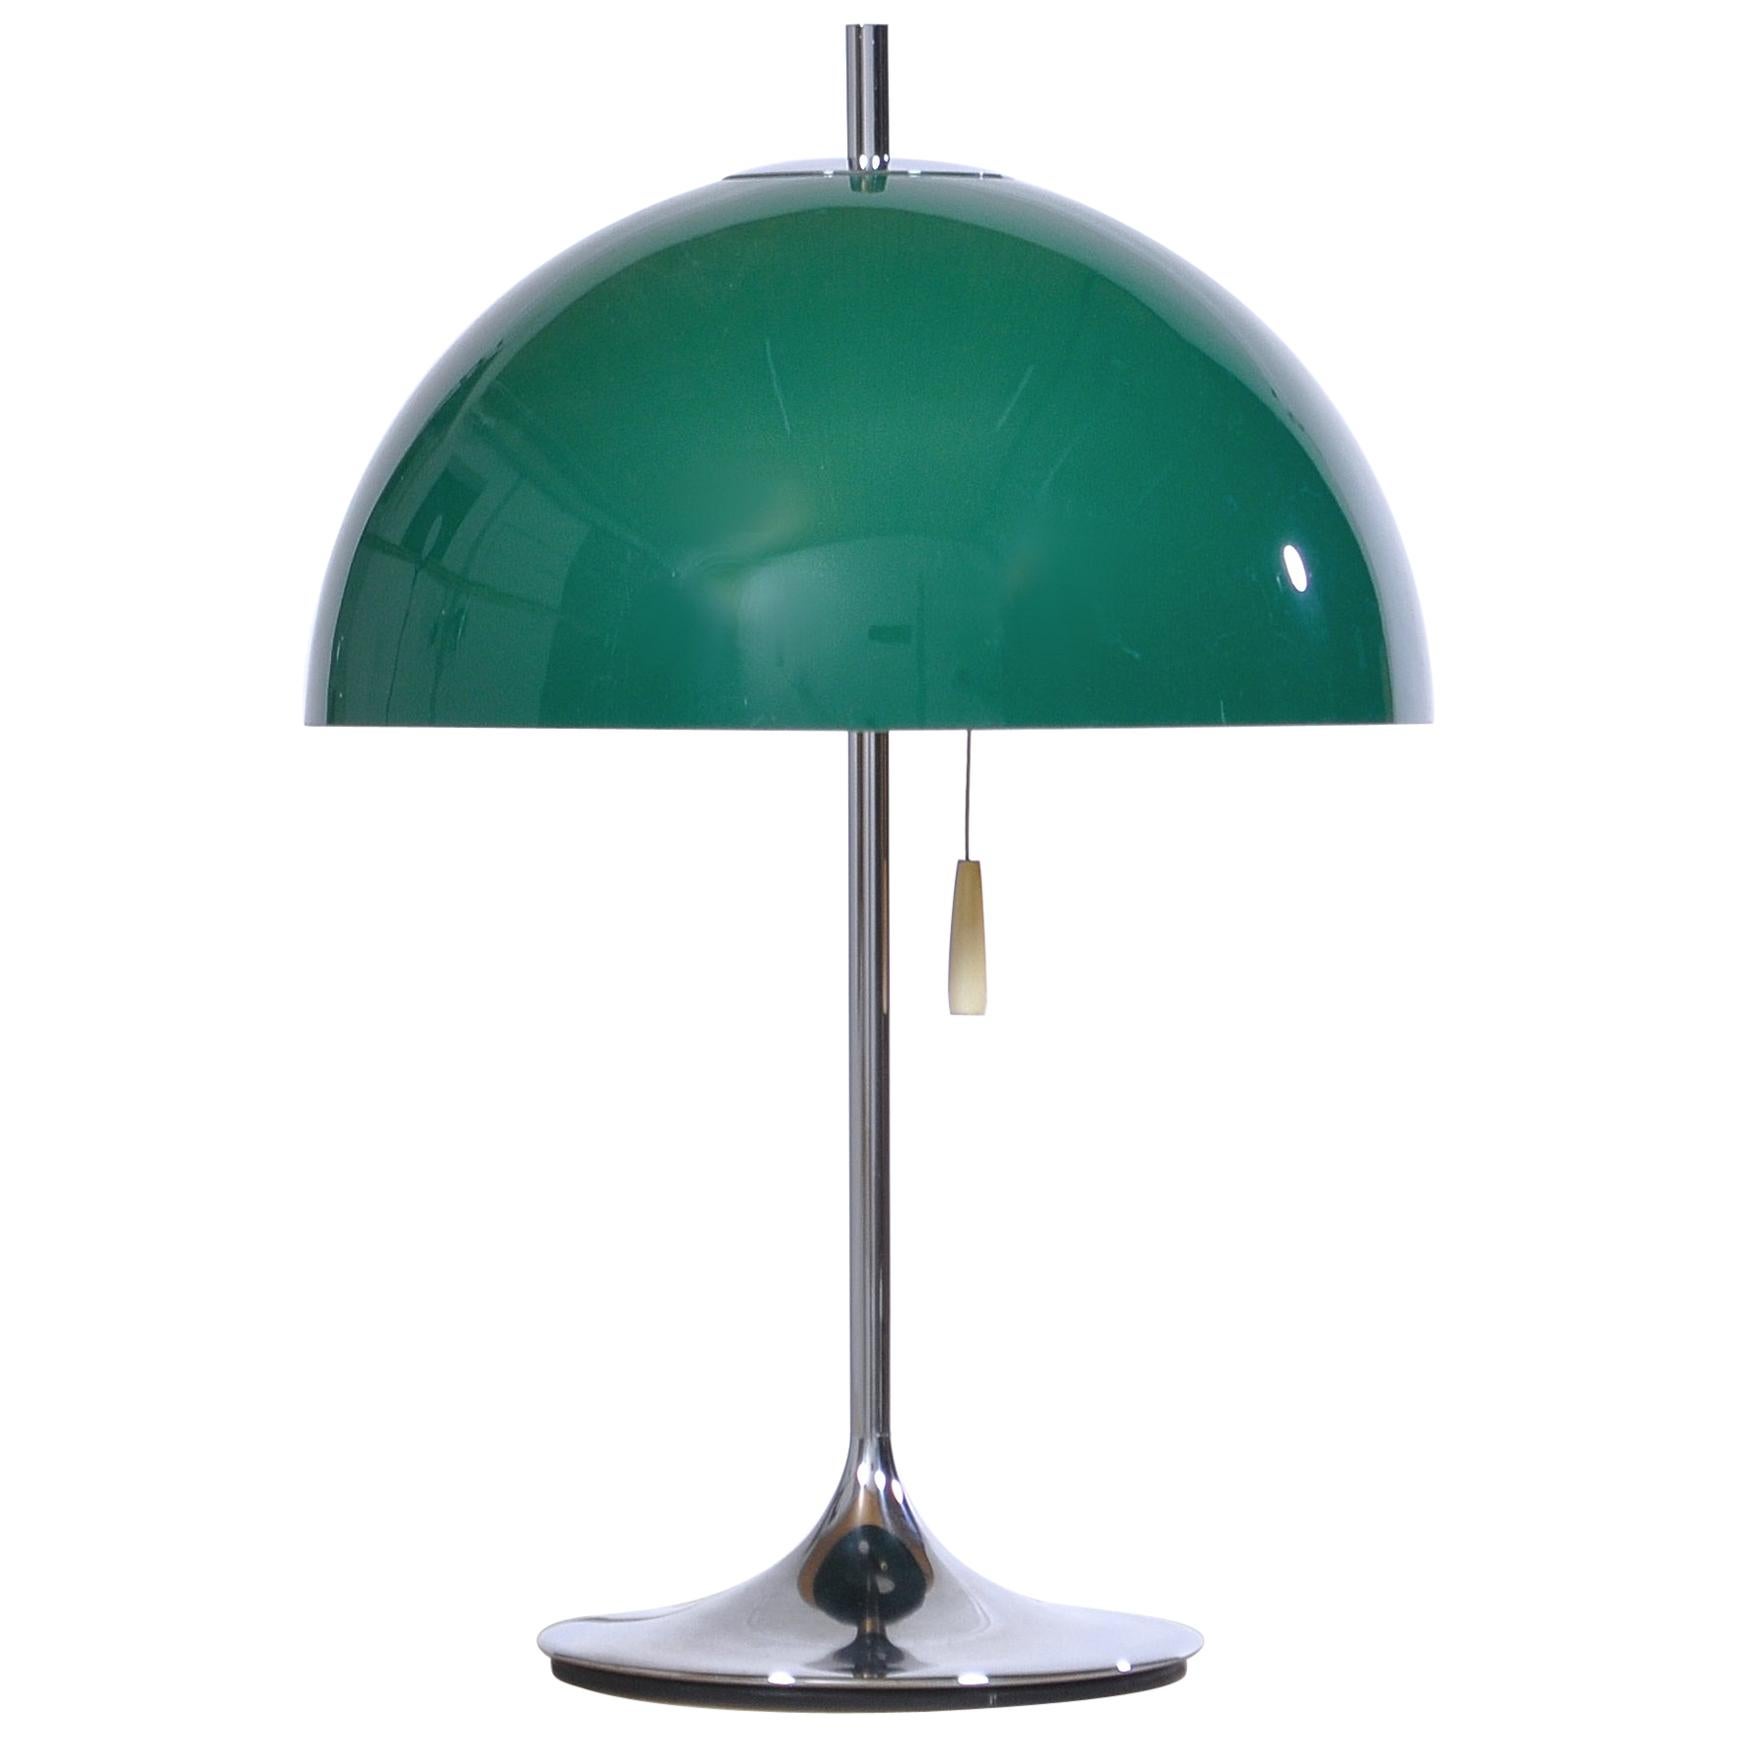 Space Age Green and Chrome Table Lamp by Frank J. Bentler for Wila, 1960s  at 1stDibs | frank bentler lampe, frank j bentler lampe, frank j. green